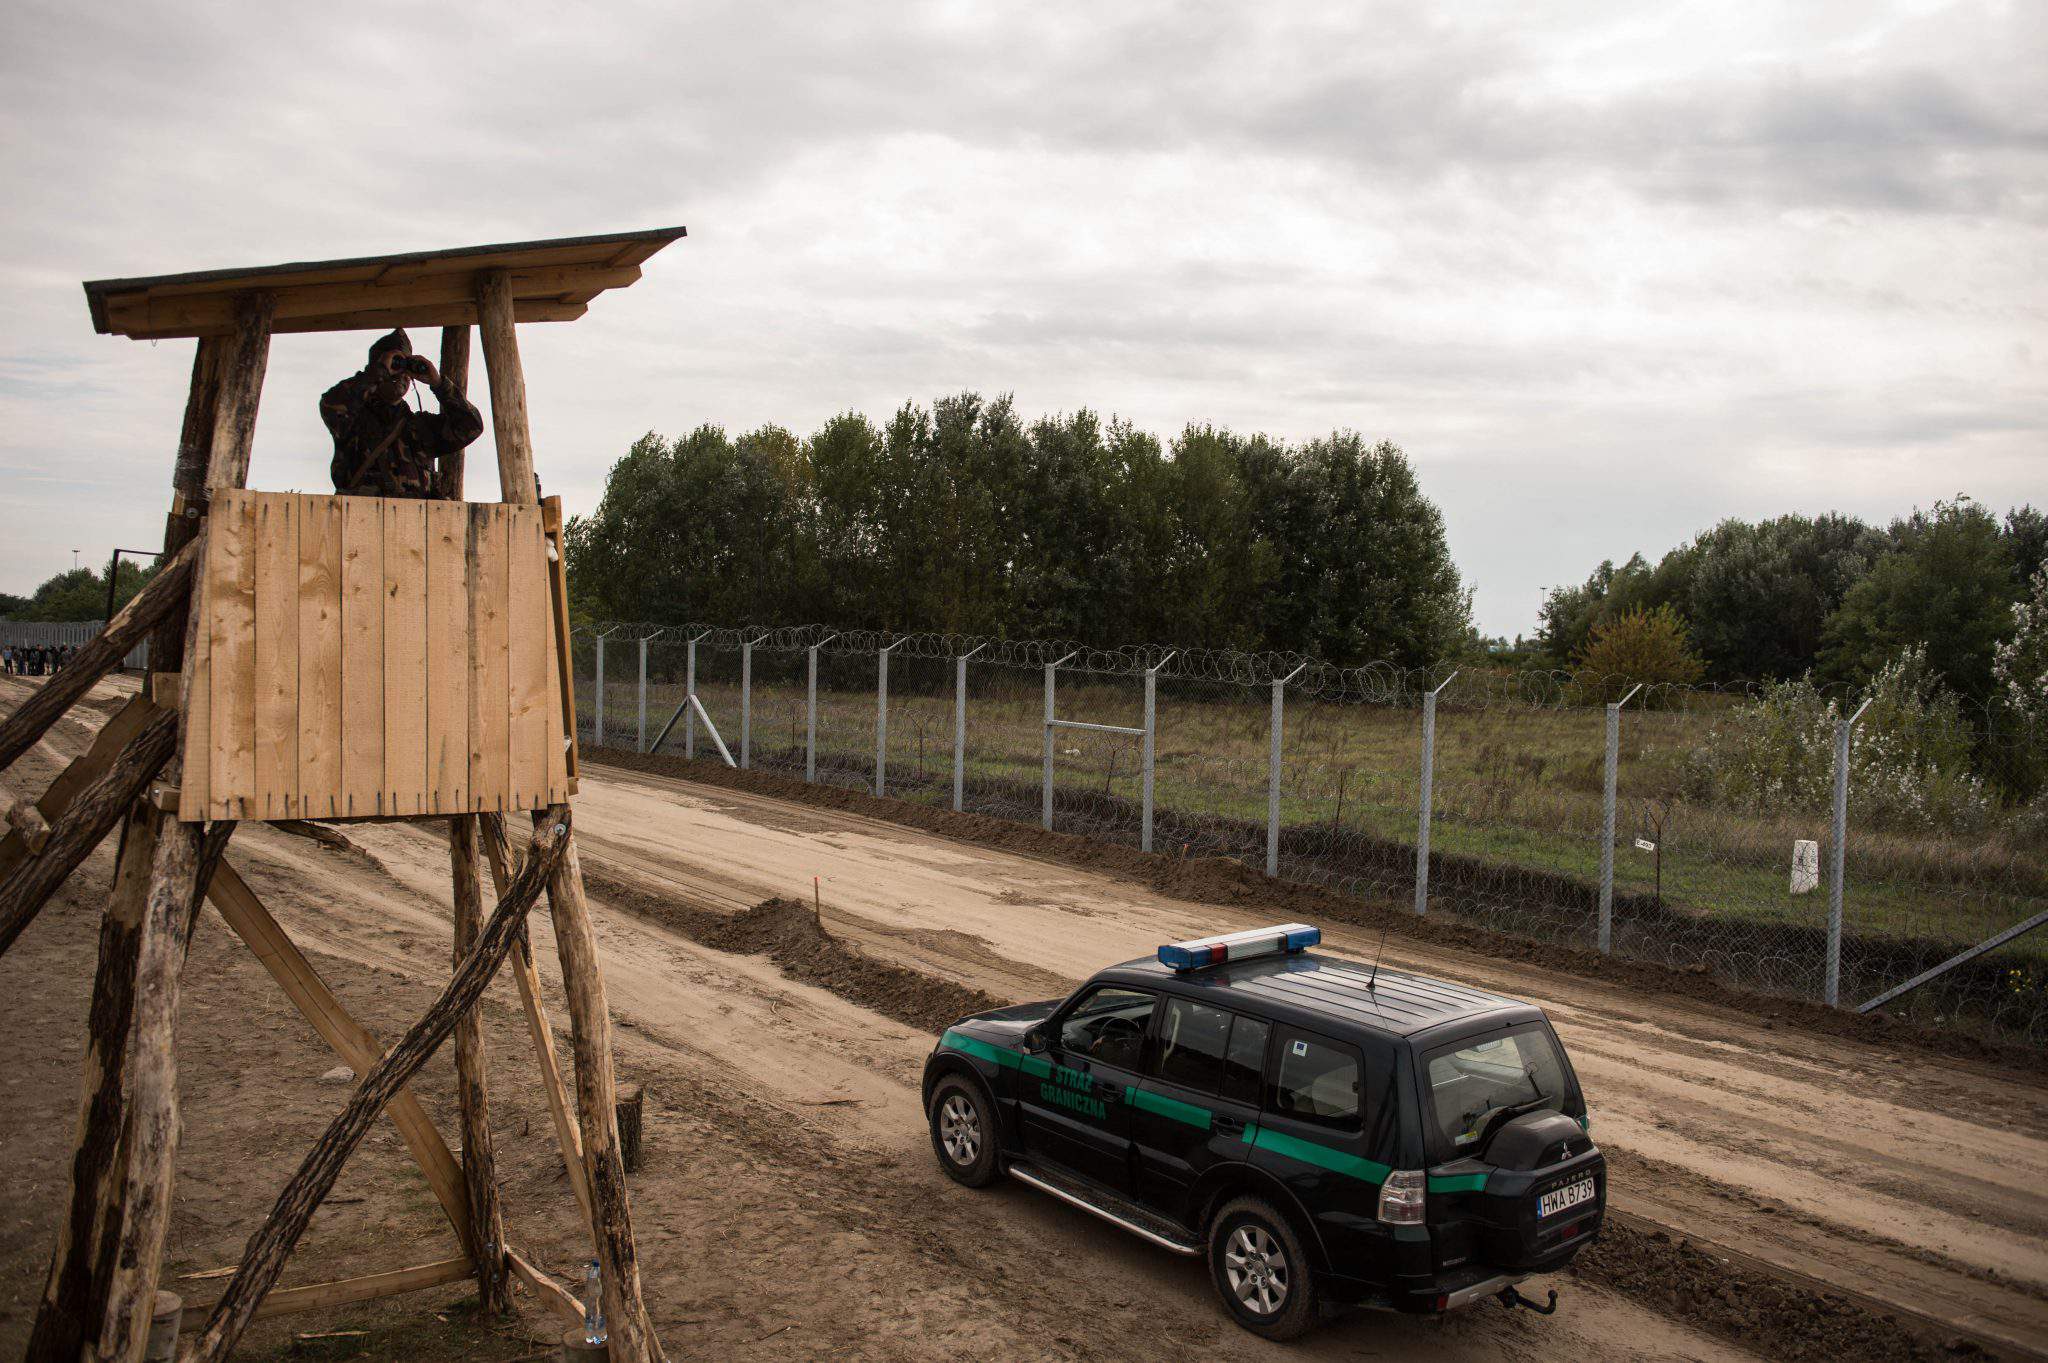 migration - Hungary border fence army